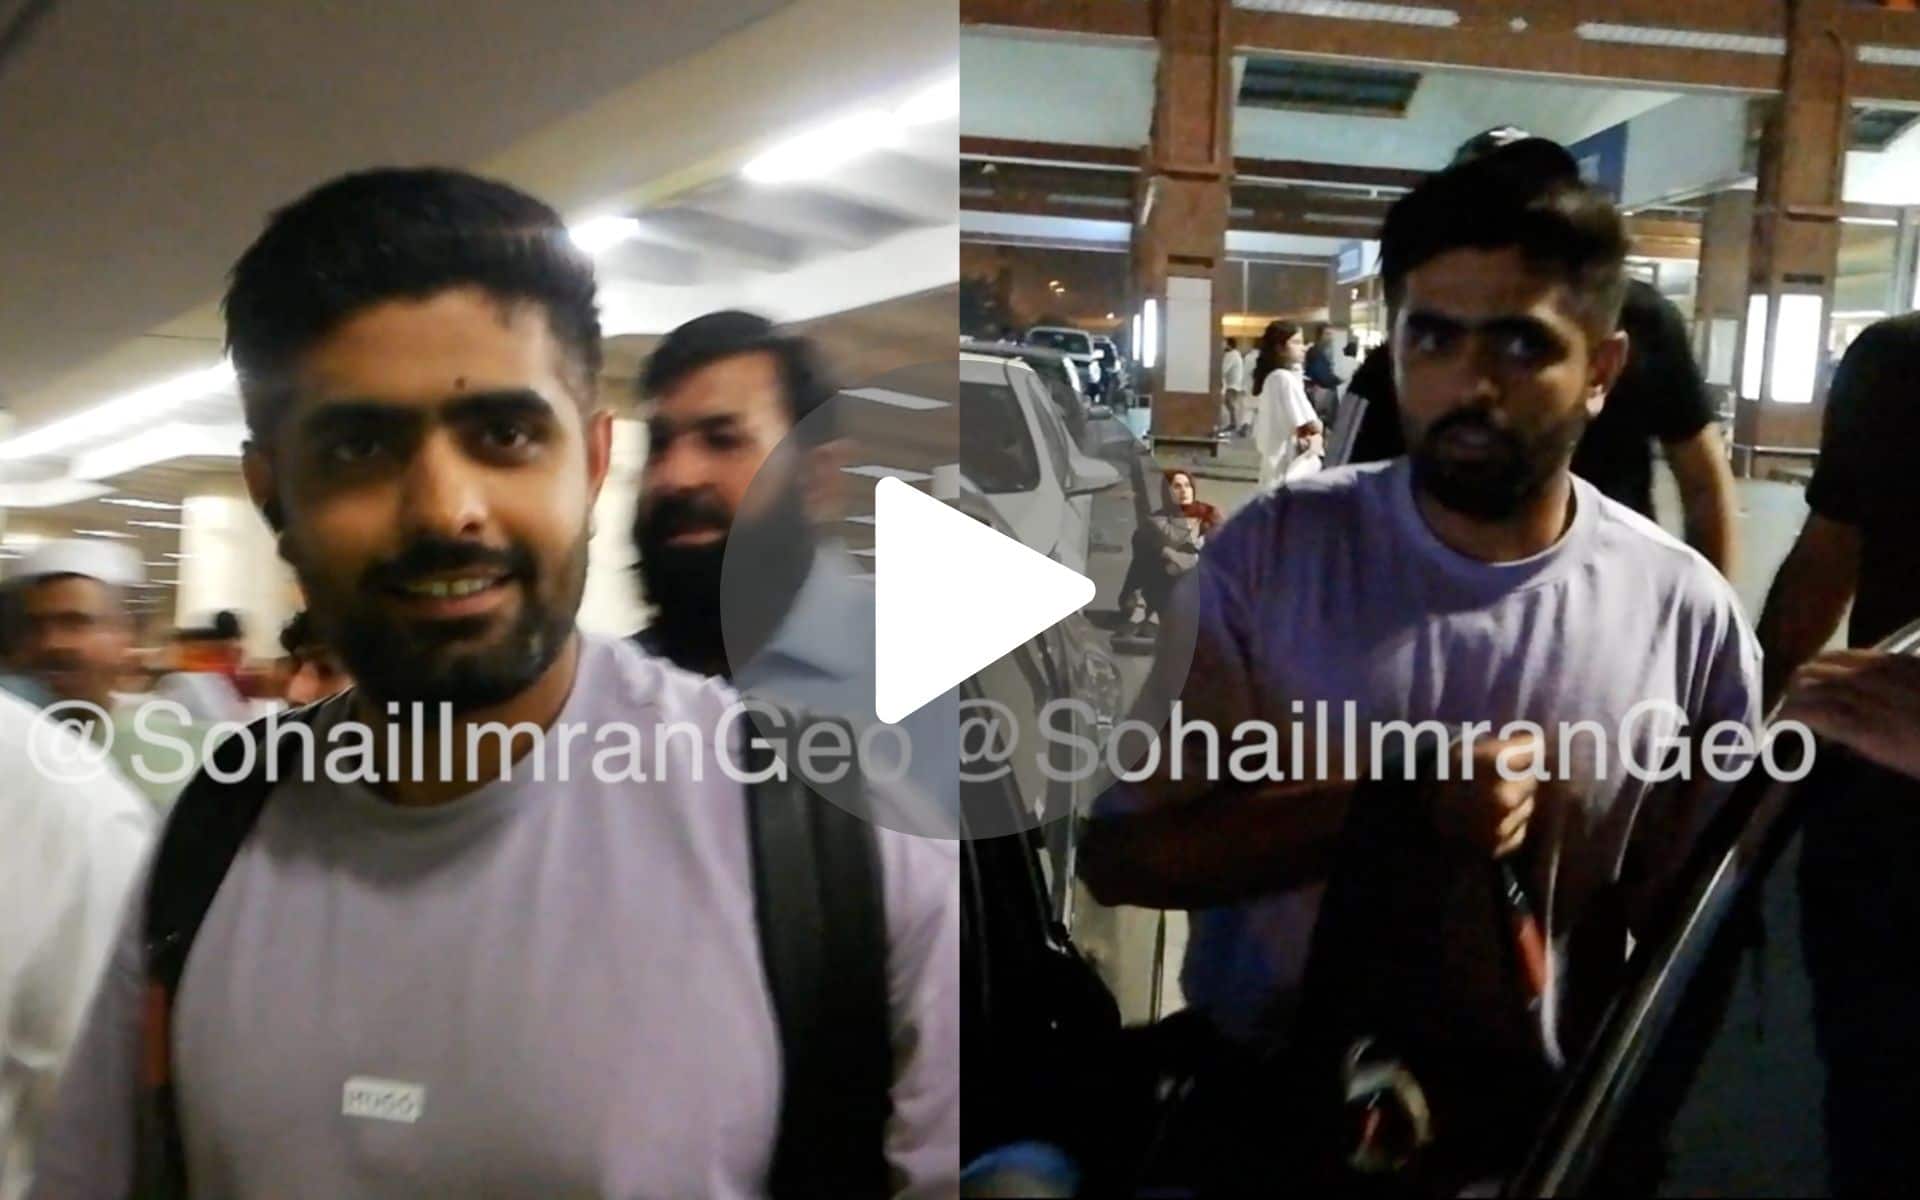 [Watch] Babar Azam Surrounded by Heavy Security As He Arrives In Lahore After World Cup Debacle